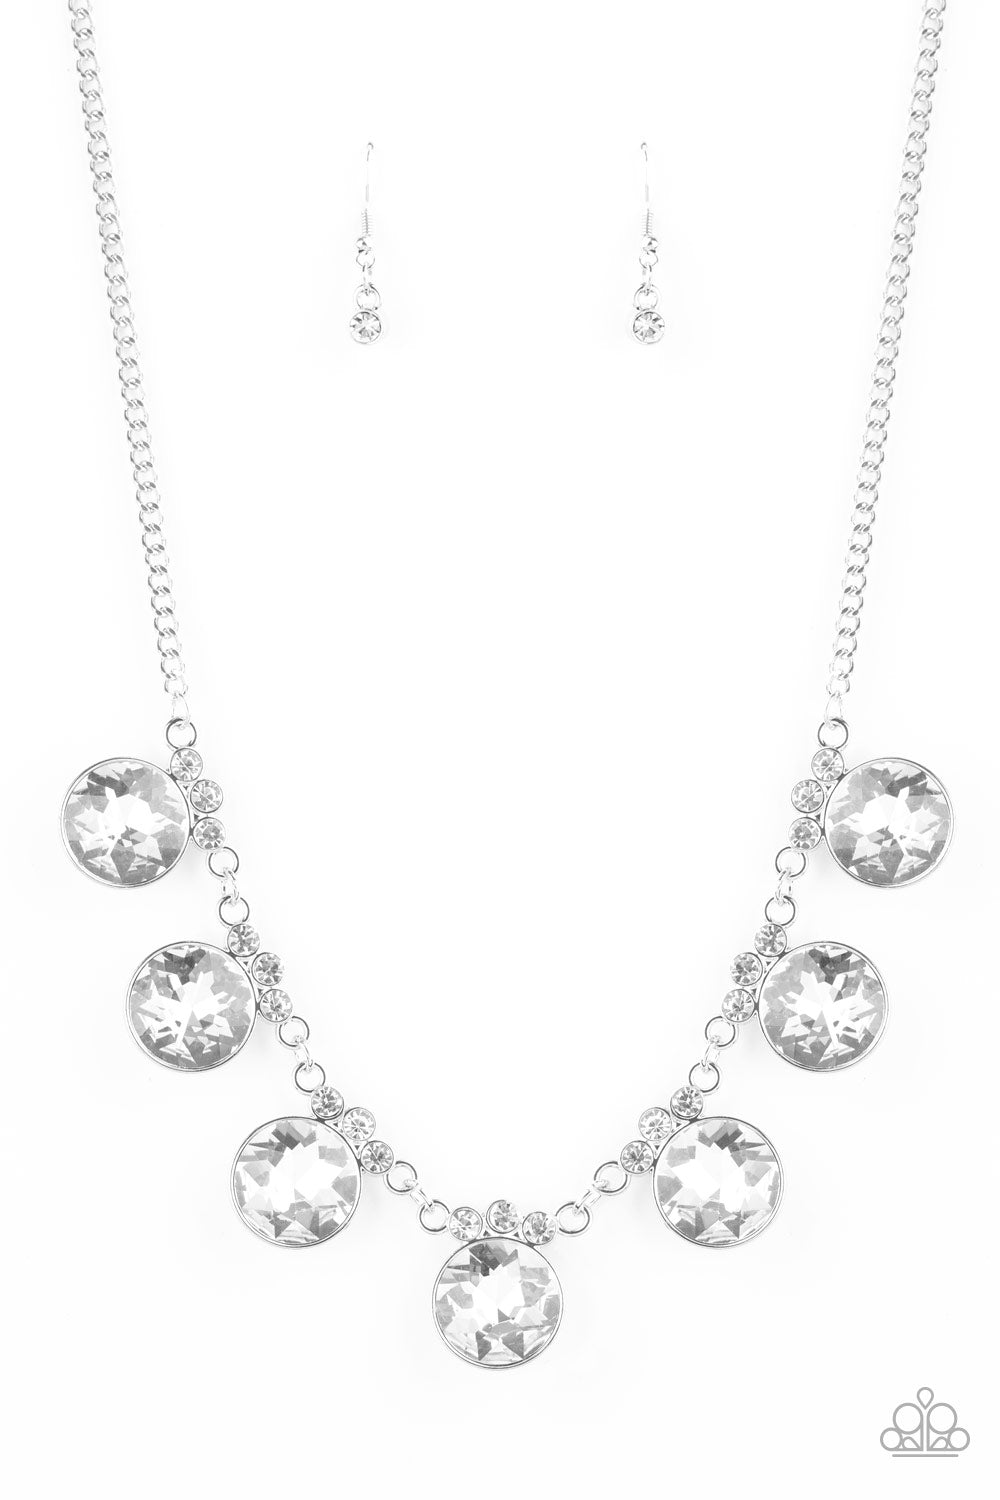 GLOW-Getter Glamour - White - Necklace - Paparazzi Accessories